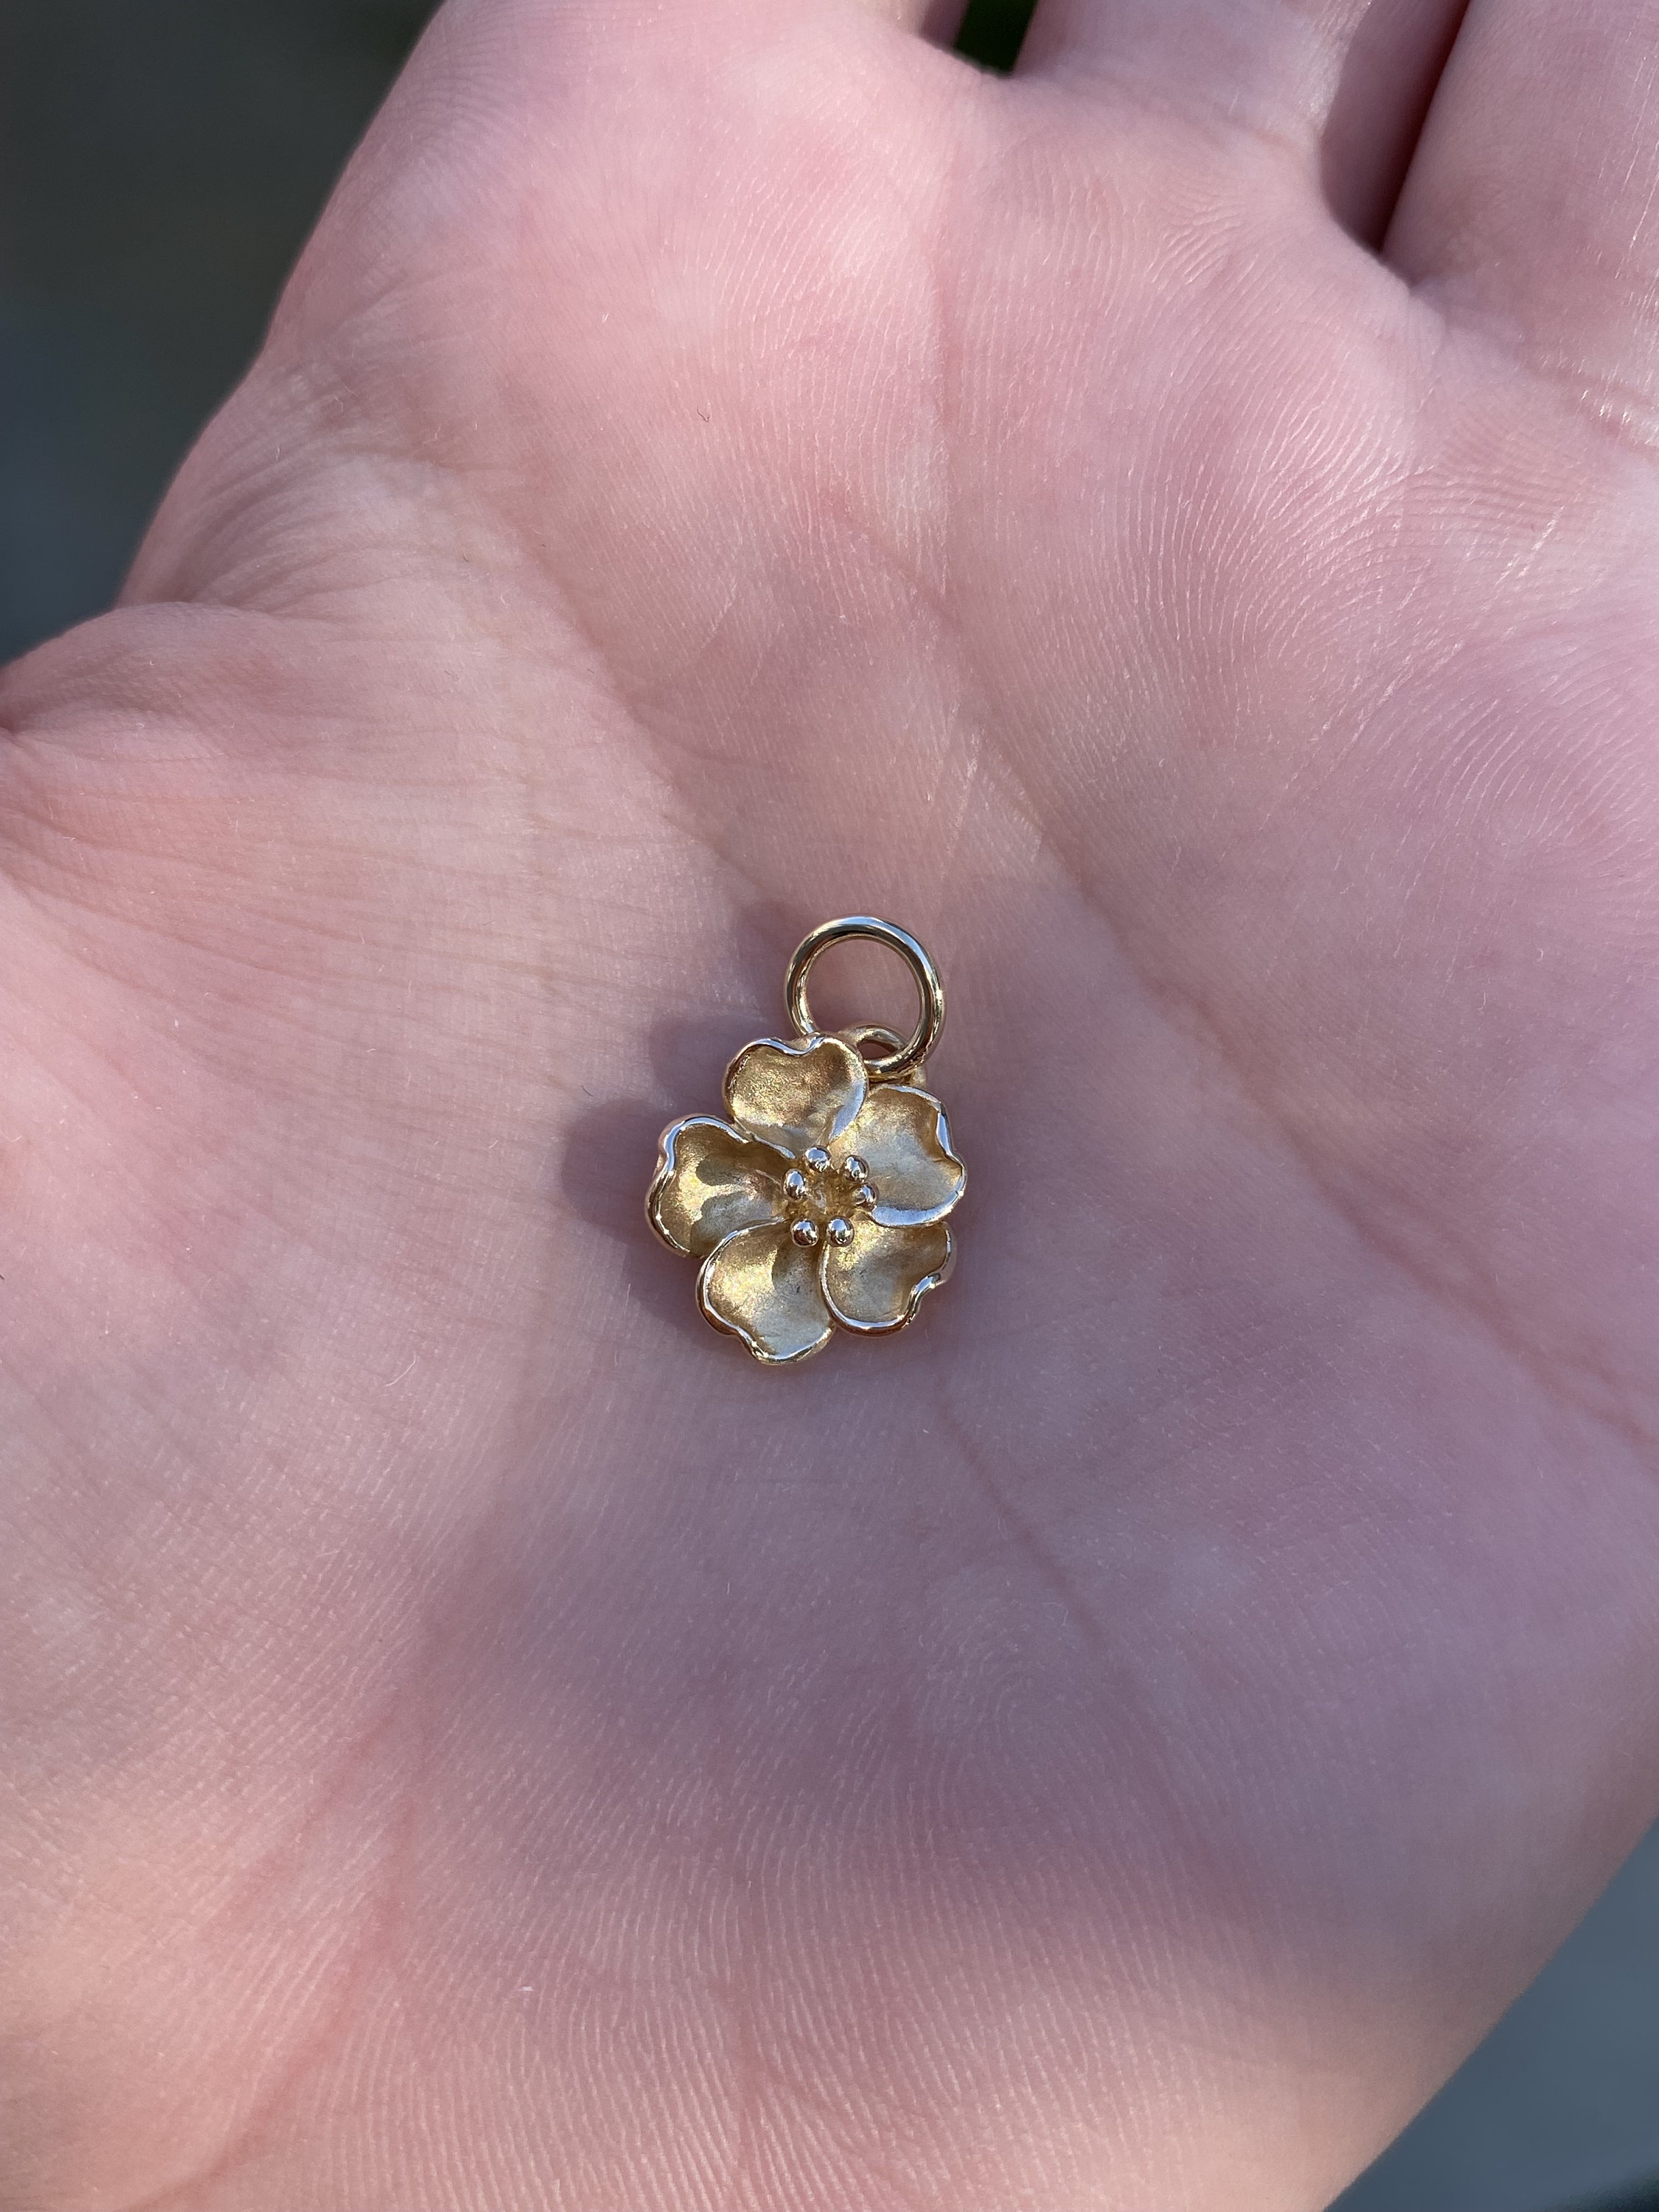 2 PC Bag of 14K Gold Filled 7.3x10 mm Flower Charms